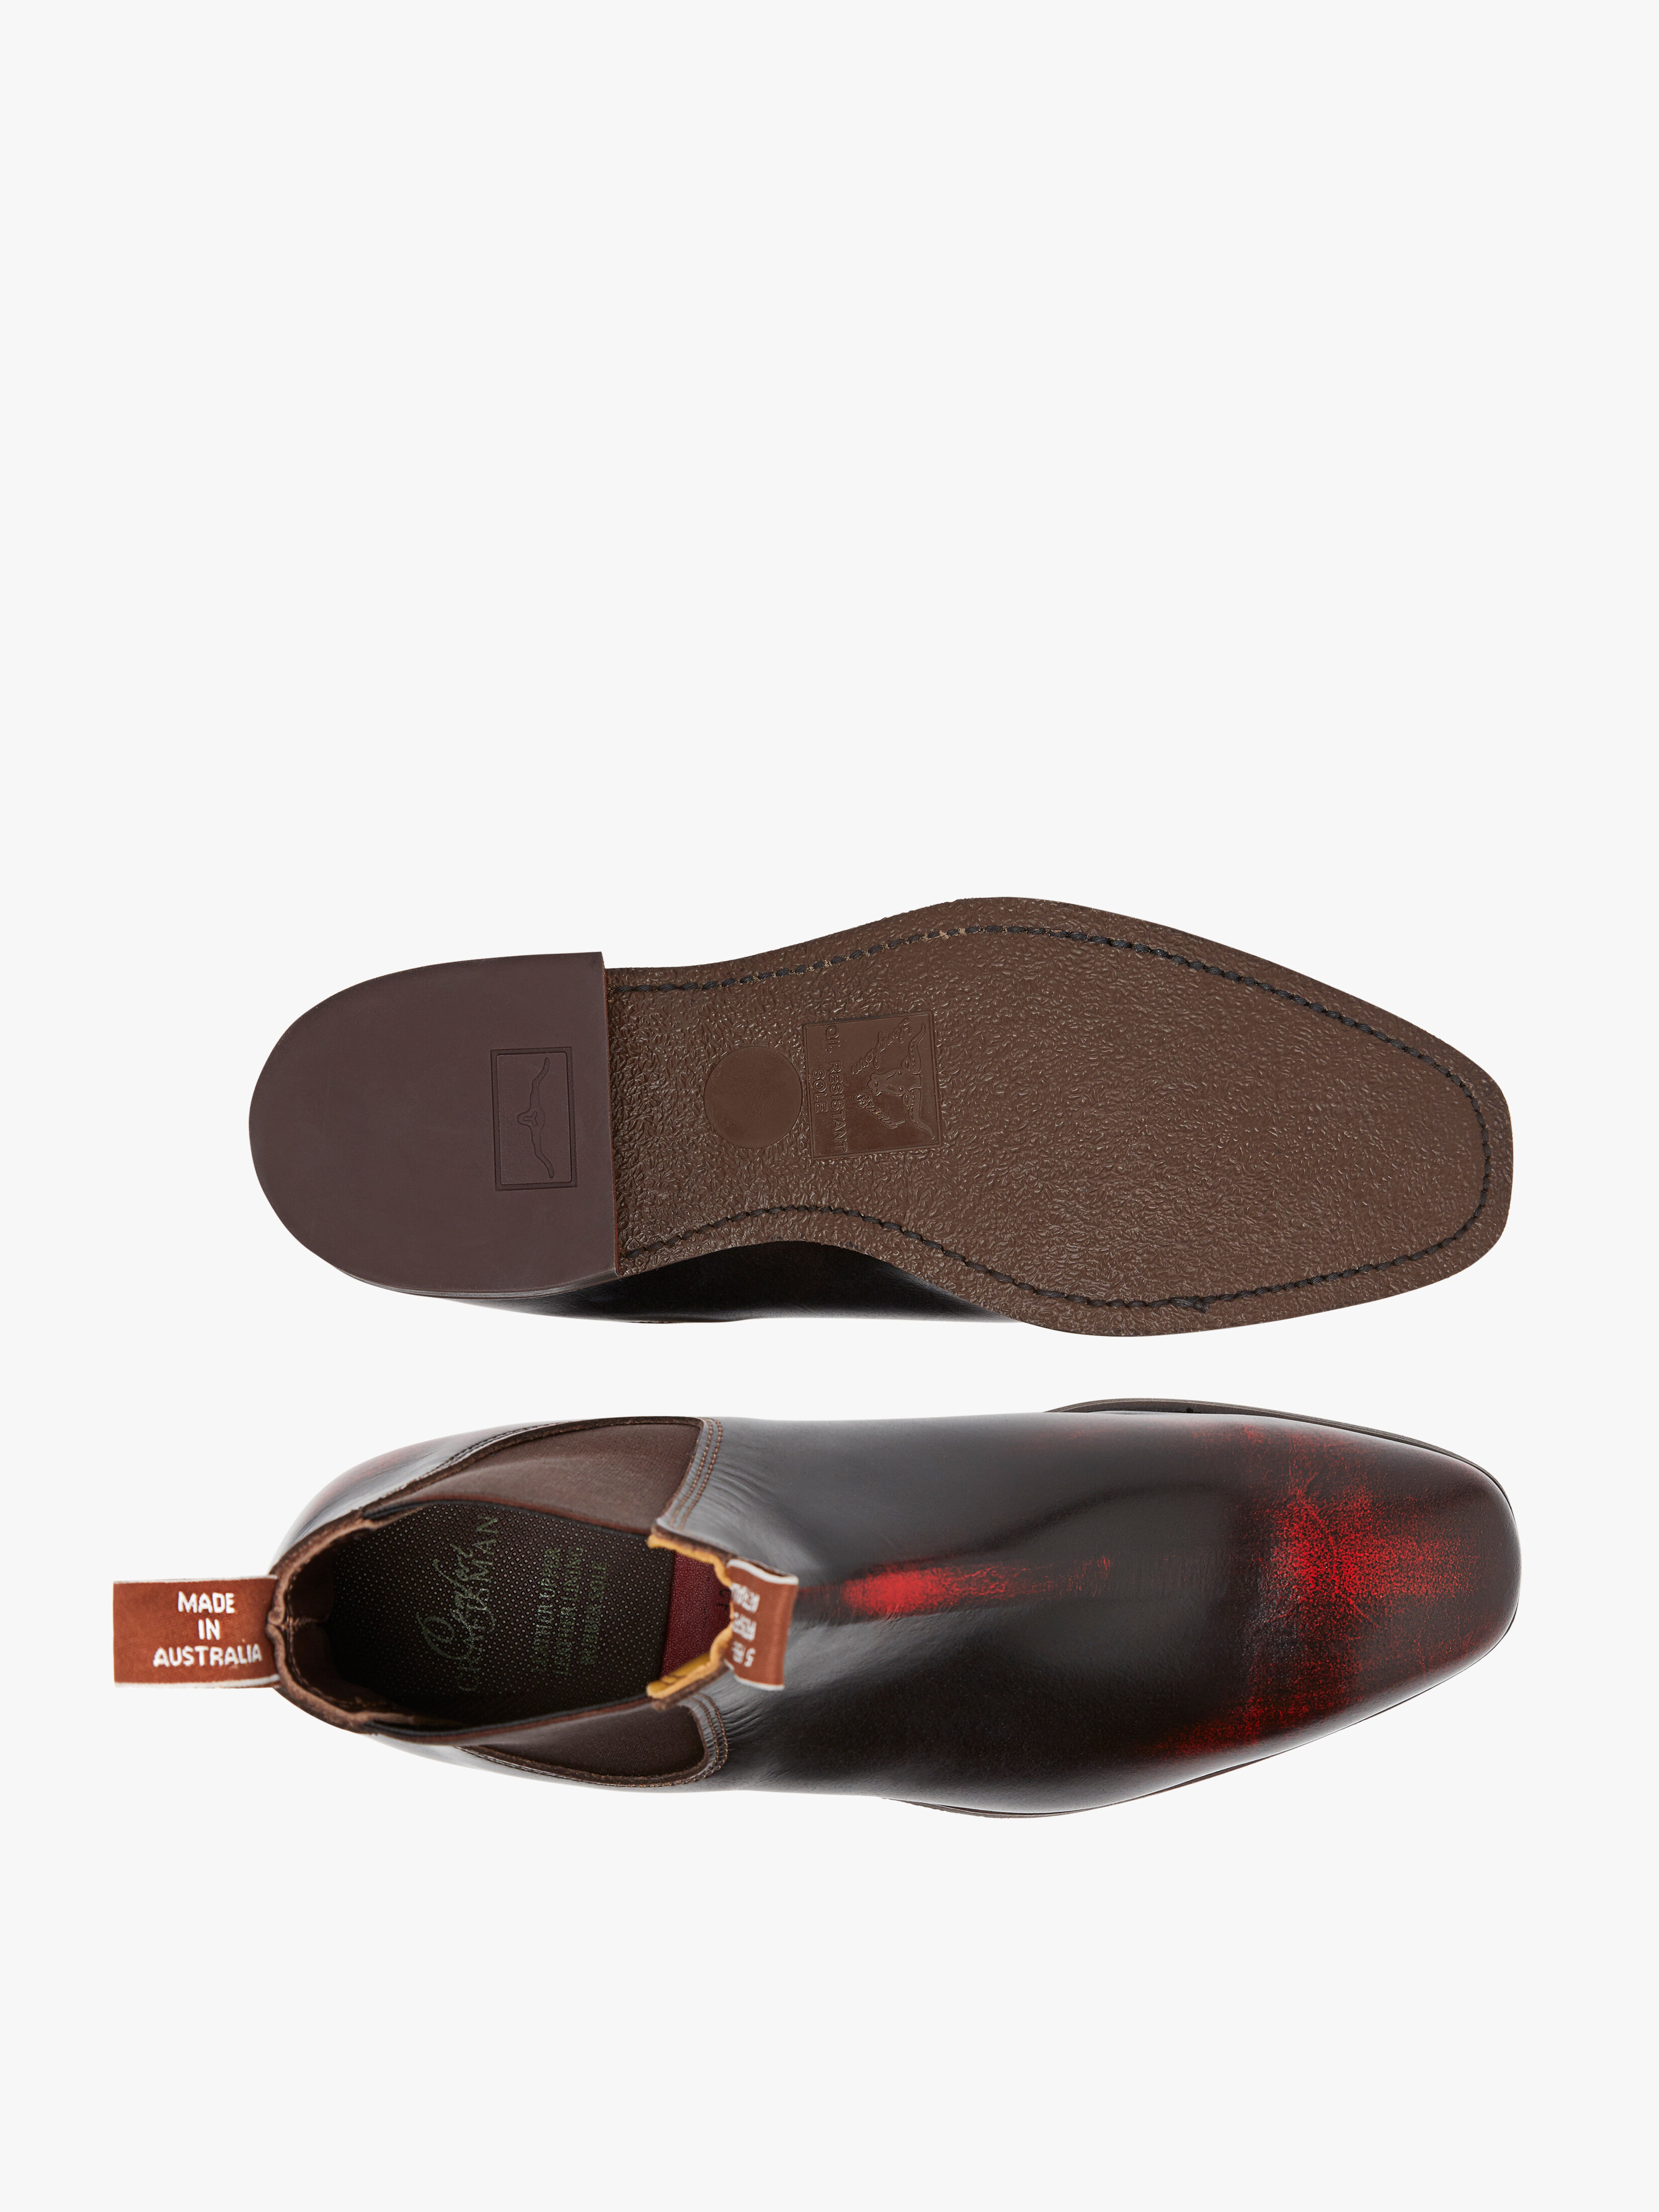 rm williams insole